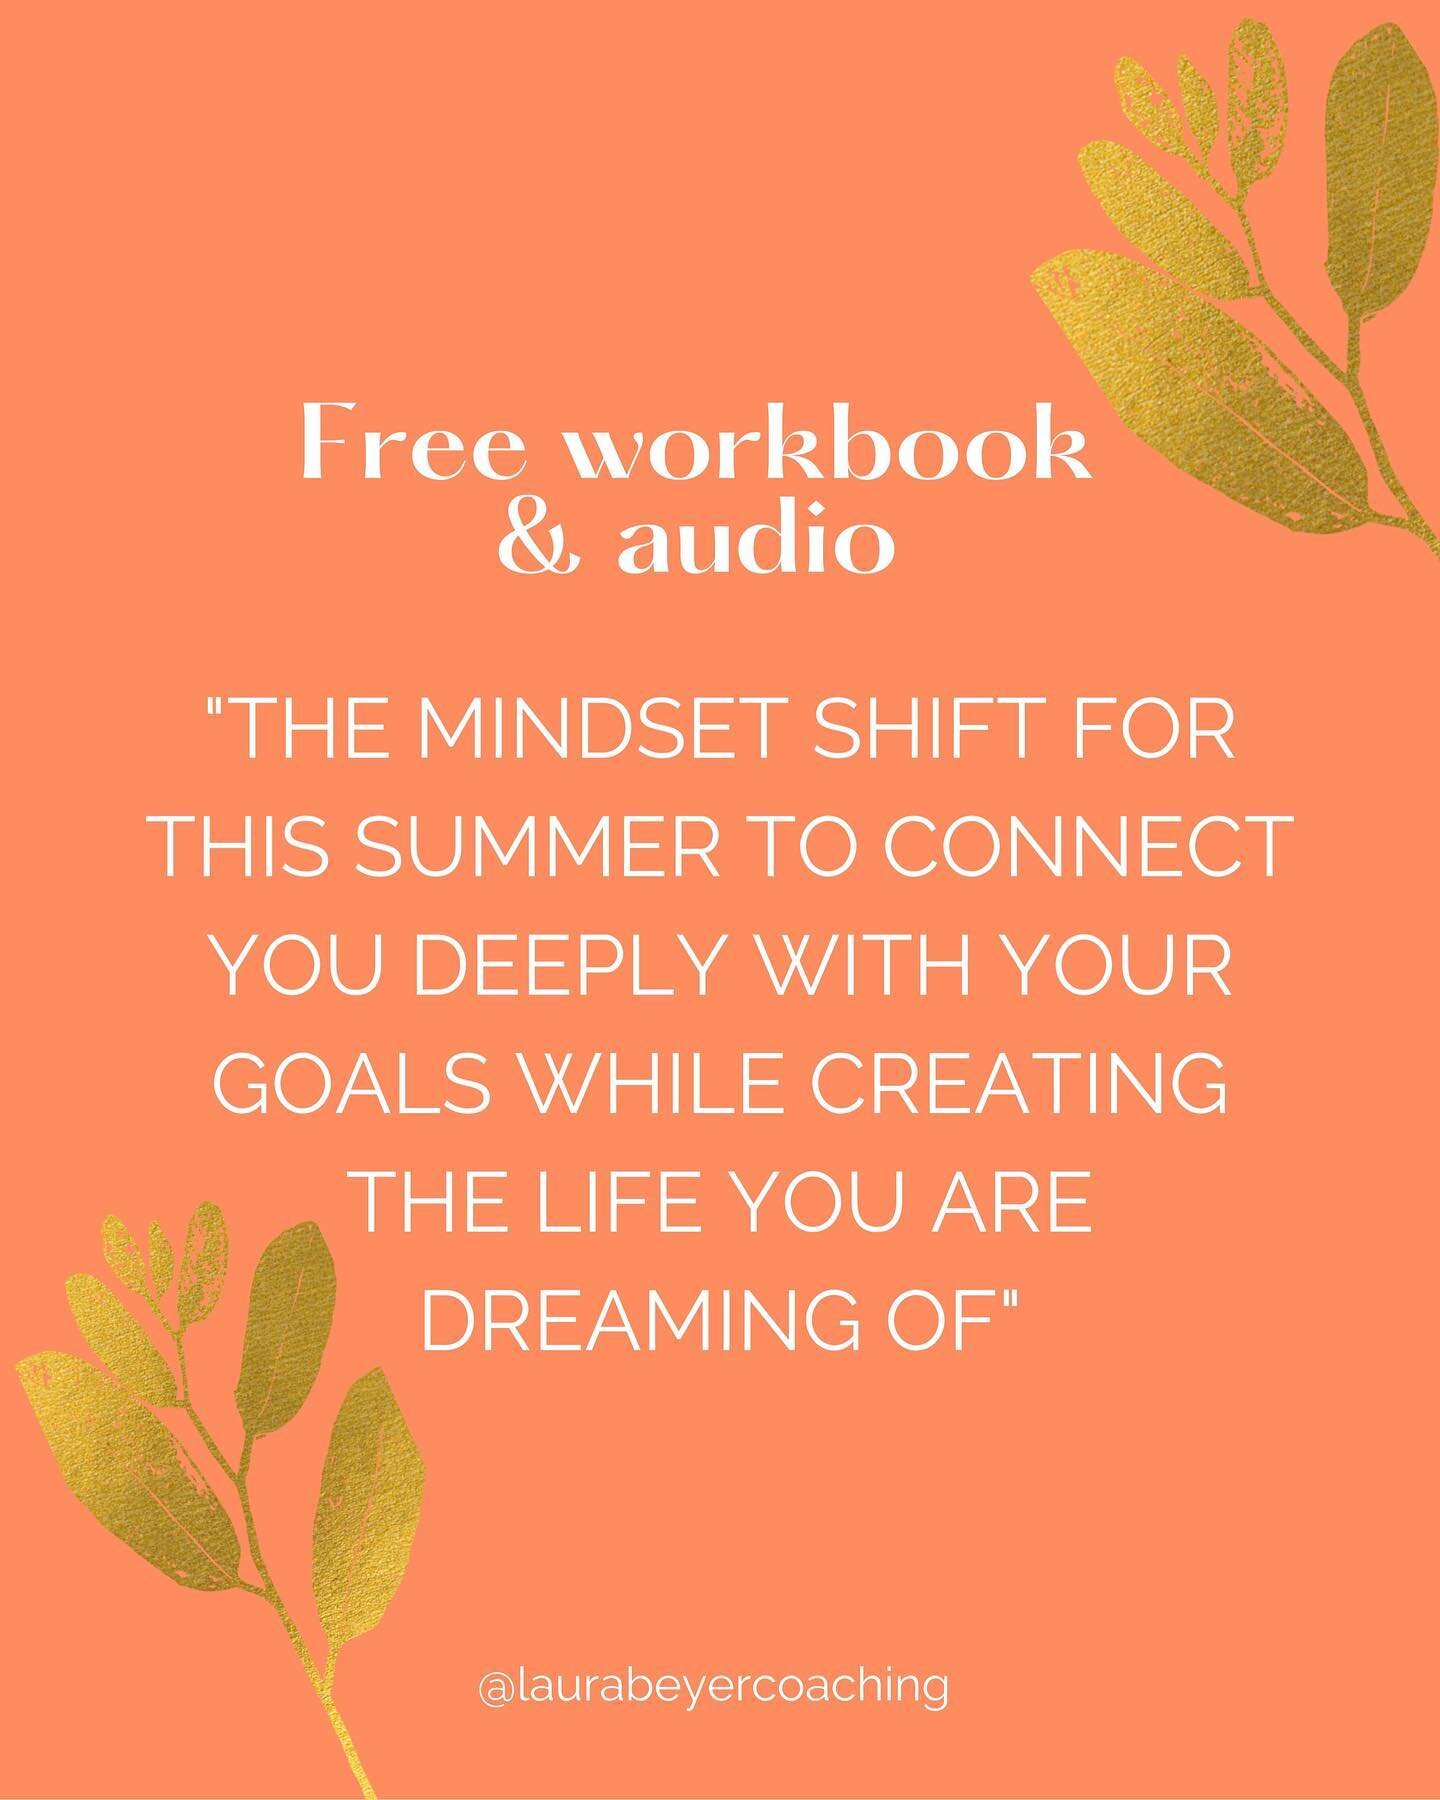 𝗙𝗥𝗘𝗘 𝗡𝗘𝗪 𝗥𝗘𝗦𝗢𝗨𝗥𝗖𝗘 𝗙𝗢𝗥 𝗬𝗢𝗨! ☀️
I created a workbook and audio files for you!
Only 30 minutes to find clarity, trust and calm!

𝙏𝙝𝙞𝙨 𝙞𝙨 𝙛𝙤𝙧 𝙮𝙤𝙪 𝙞𝙛 𝙮𝙤𝙪 𝙖𝙧𝙚 𝙘𝙧𝙖𝙫𝙞𝙣𝙜 𝙖 𝙧𝙚𝙡𝙖𝙭𝙞𝙣𝙜, 𝙟𝙤𝙮𝙛𝙪𝙡 𝙨𝙪𝙢?